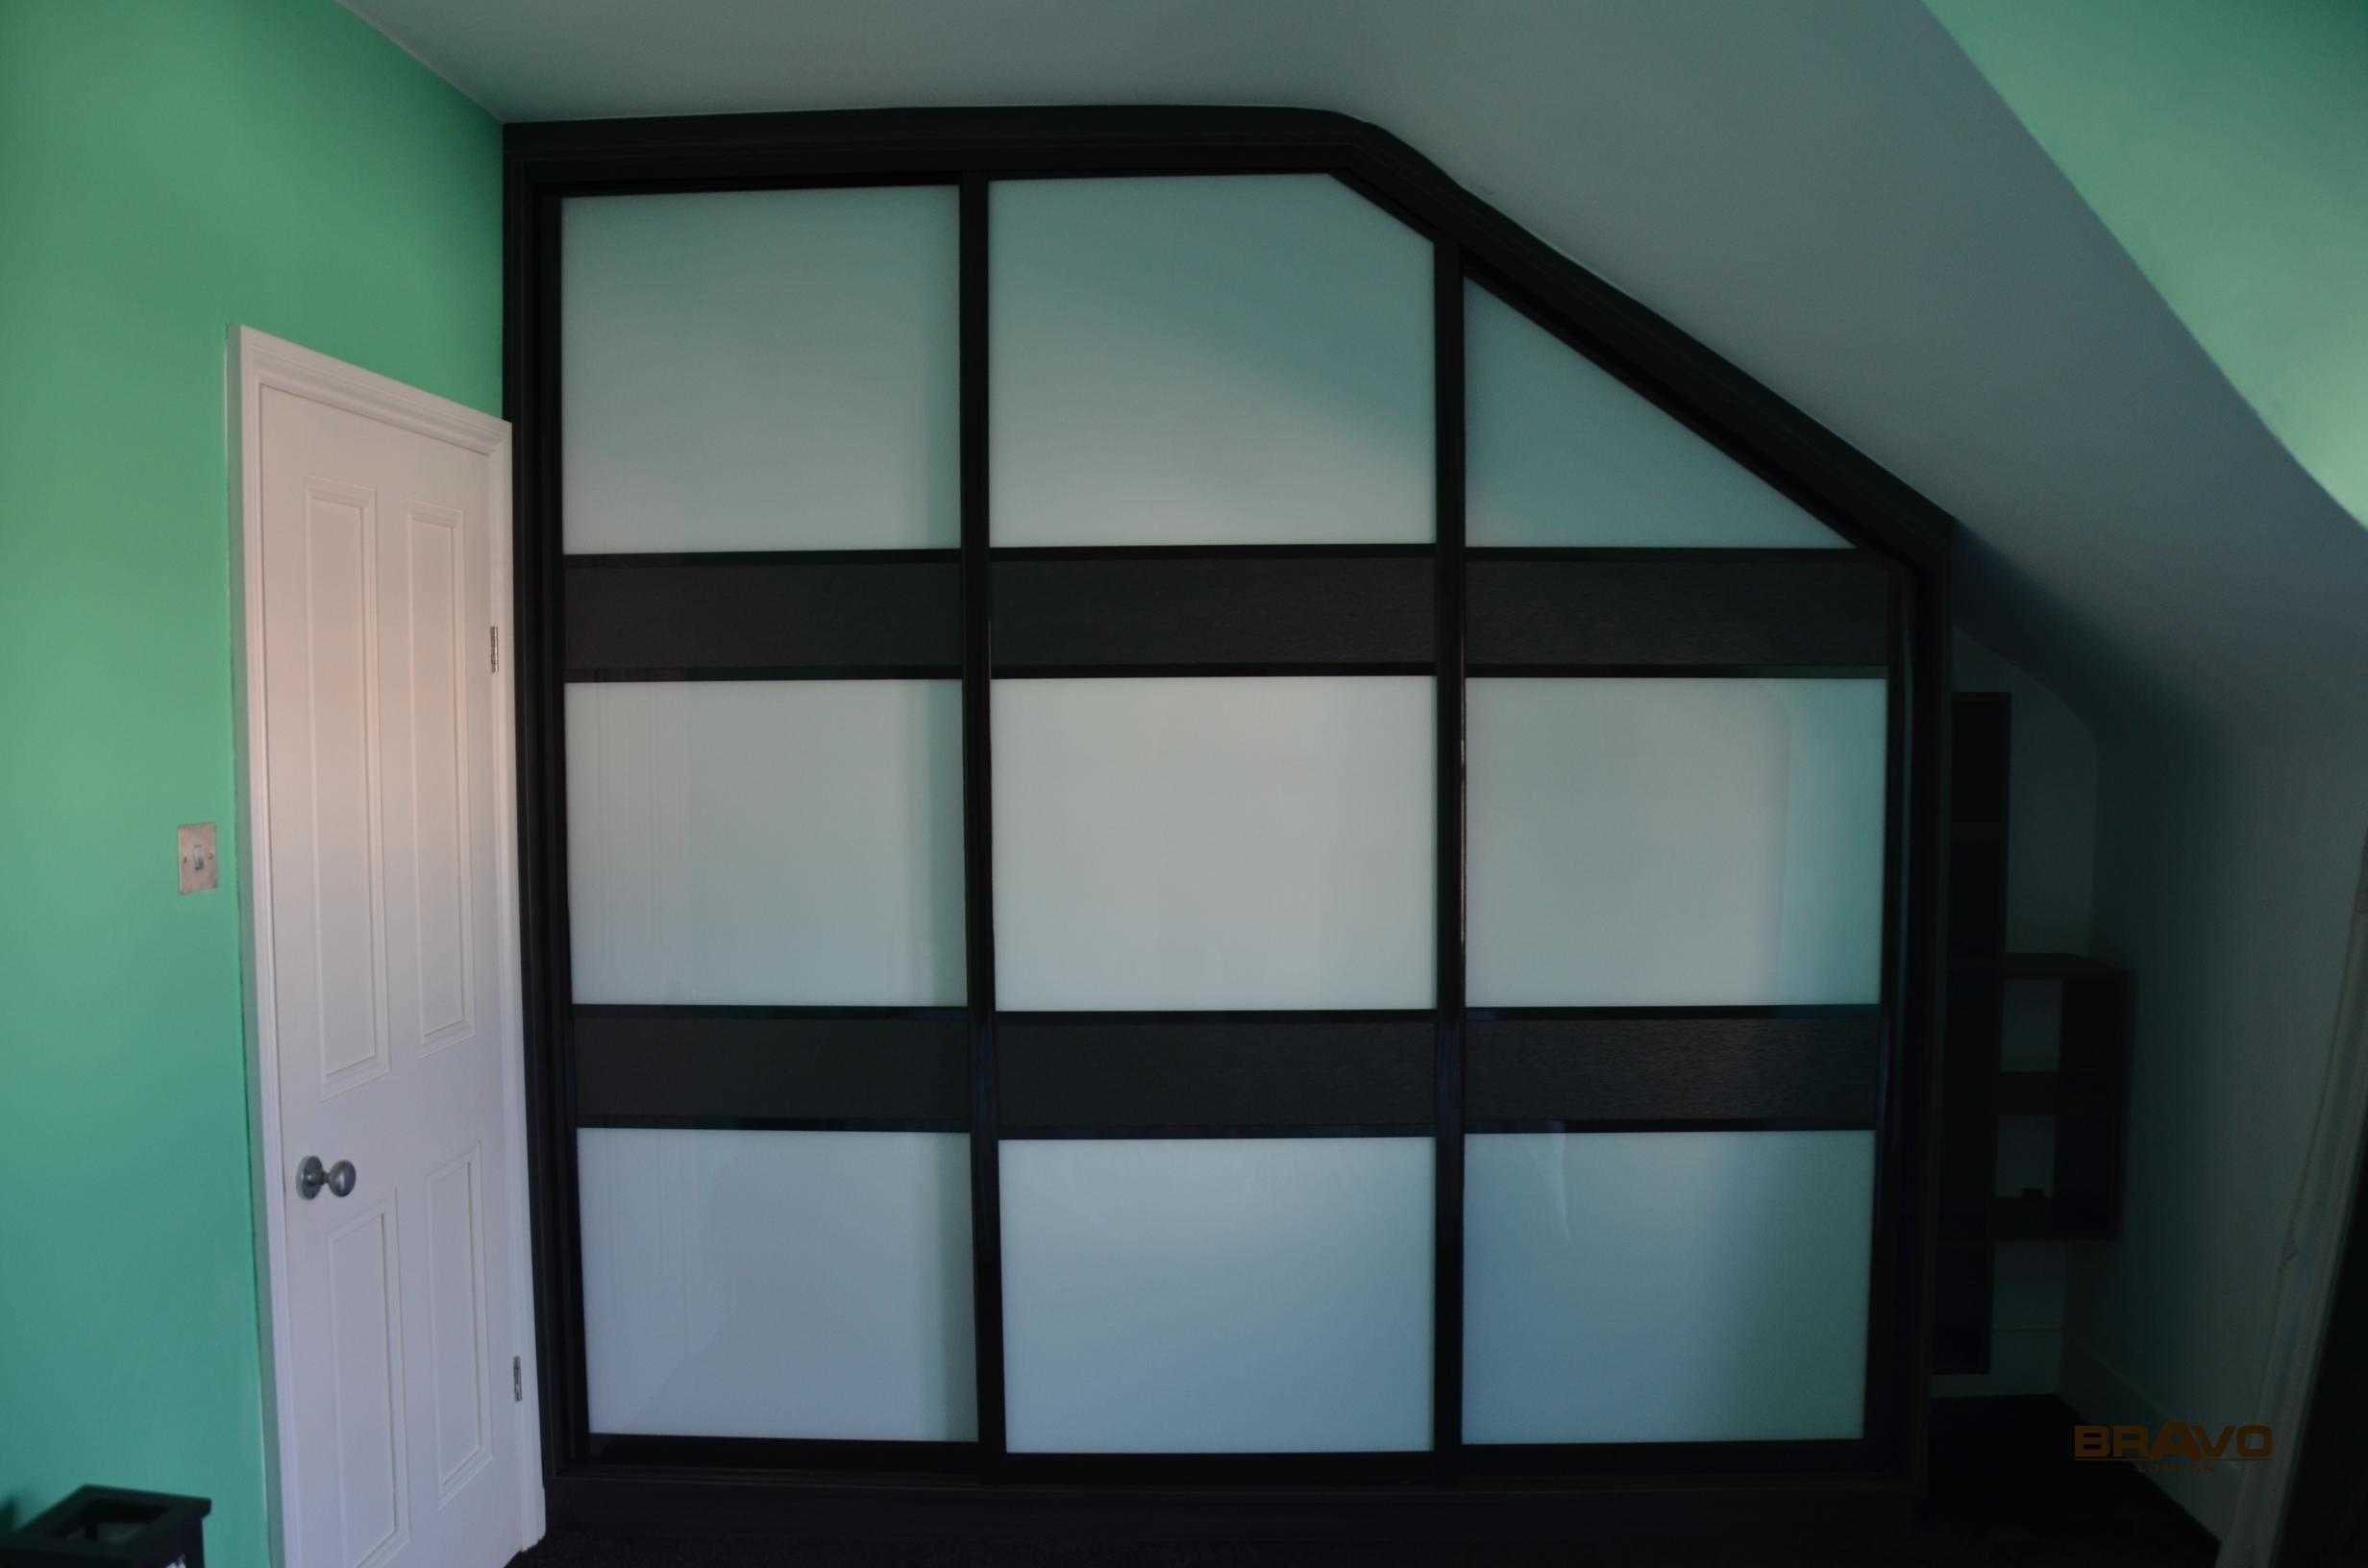 Large black-framed hinged door wardrobes with opaque white panels, set in a room with mint green walls and dark floor trim.